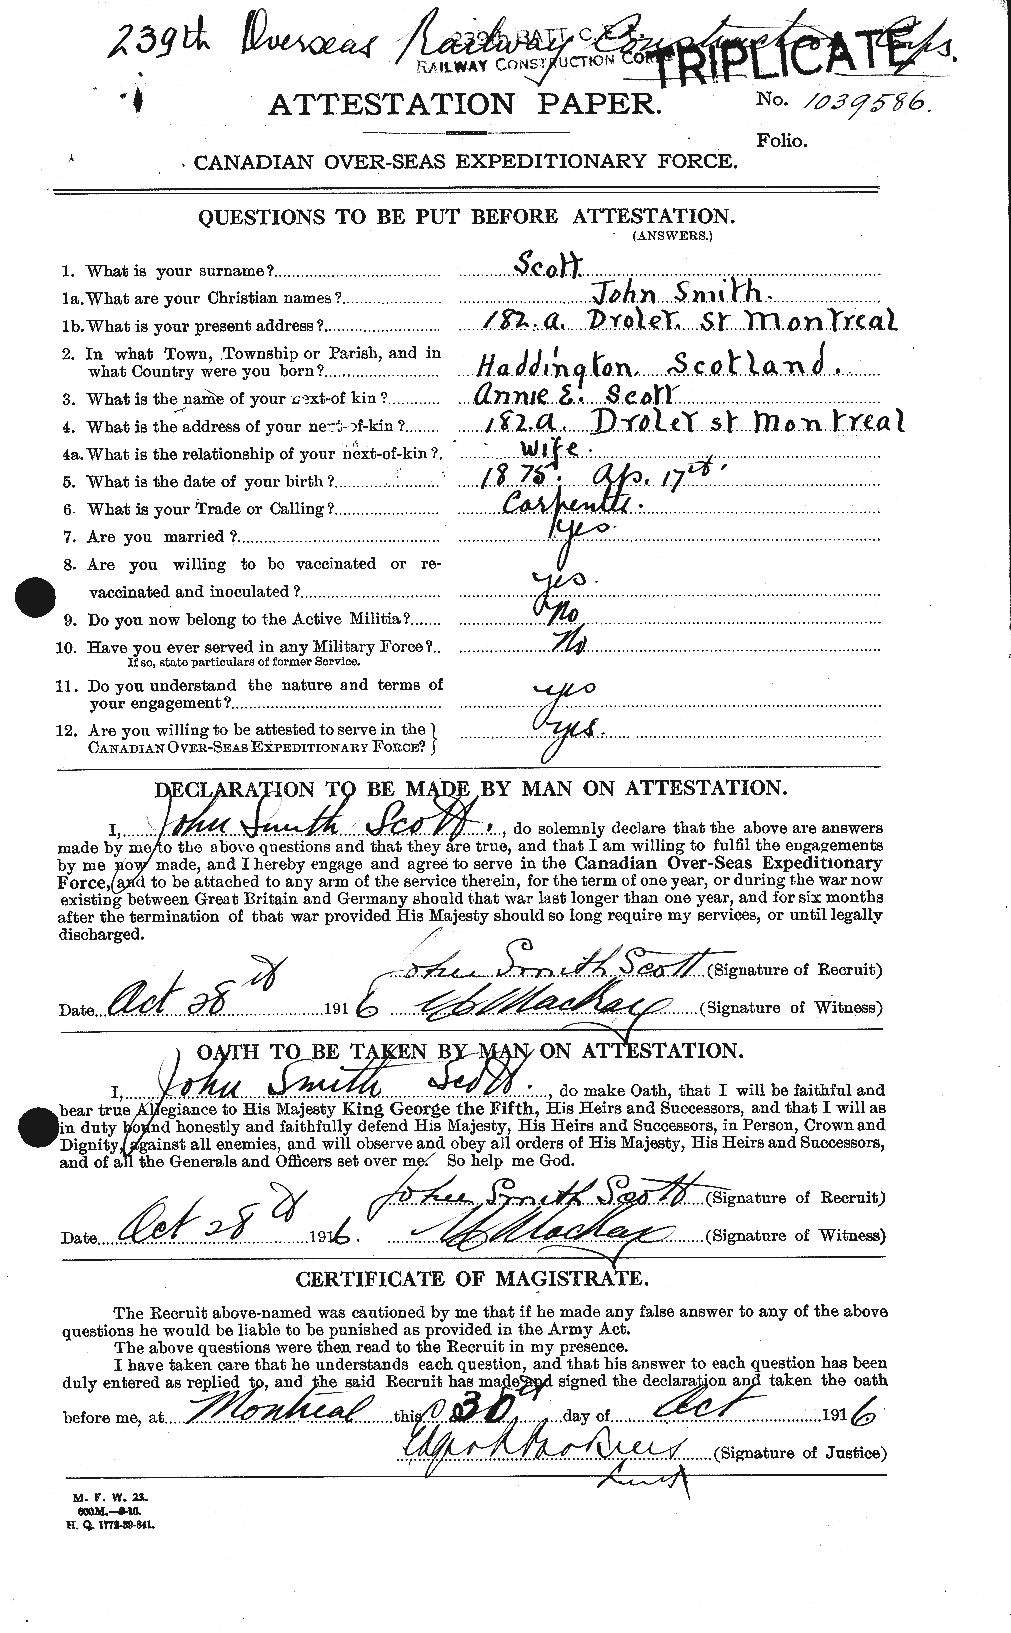 Personnel Records of the First World War - CEF 084424a